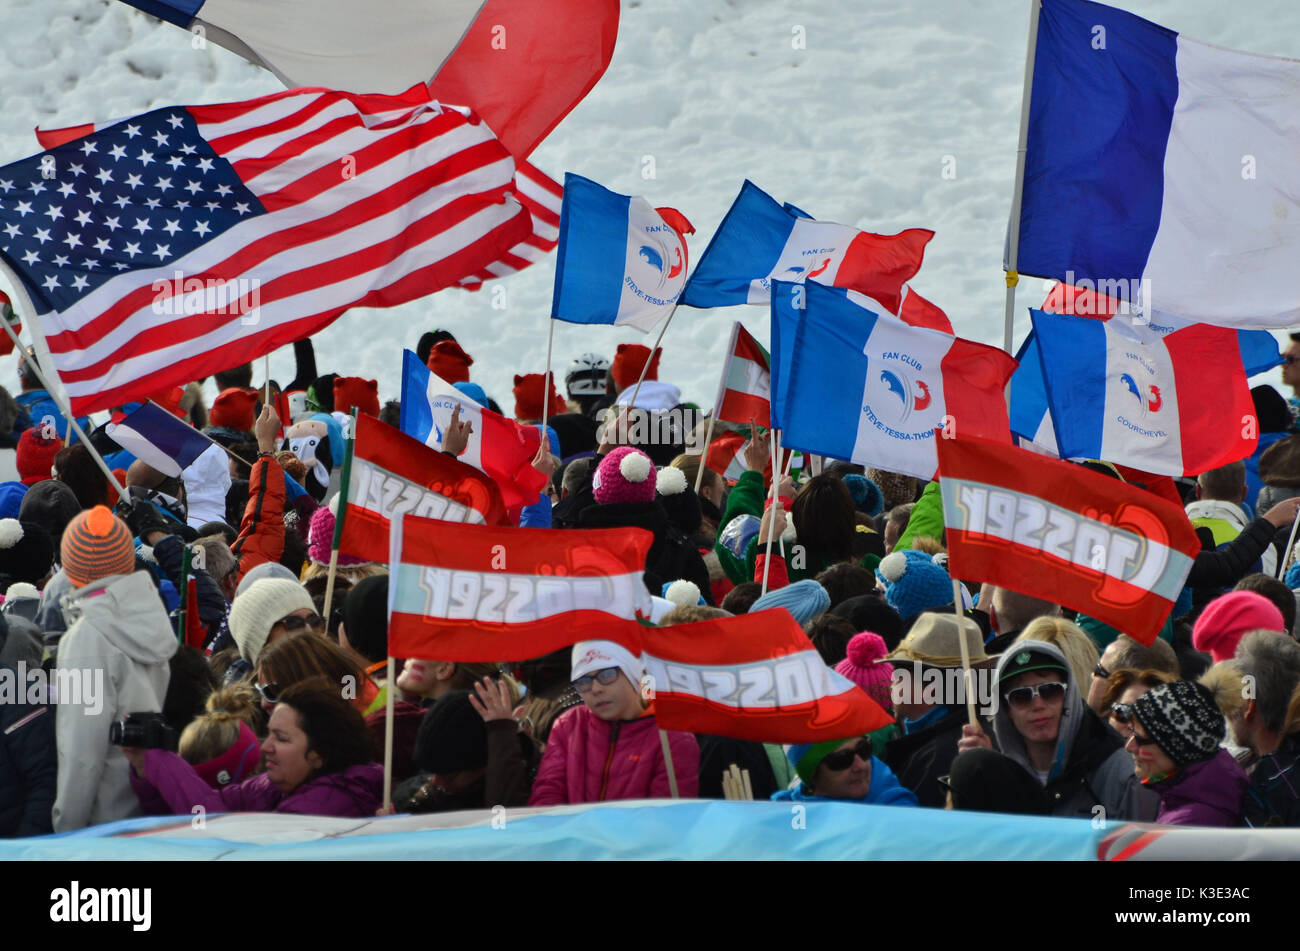 Skiing, ski race, ski world cup, supporters' club, flags, Stock Photo